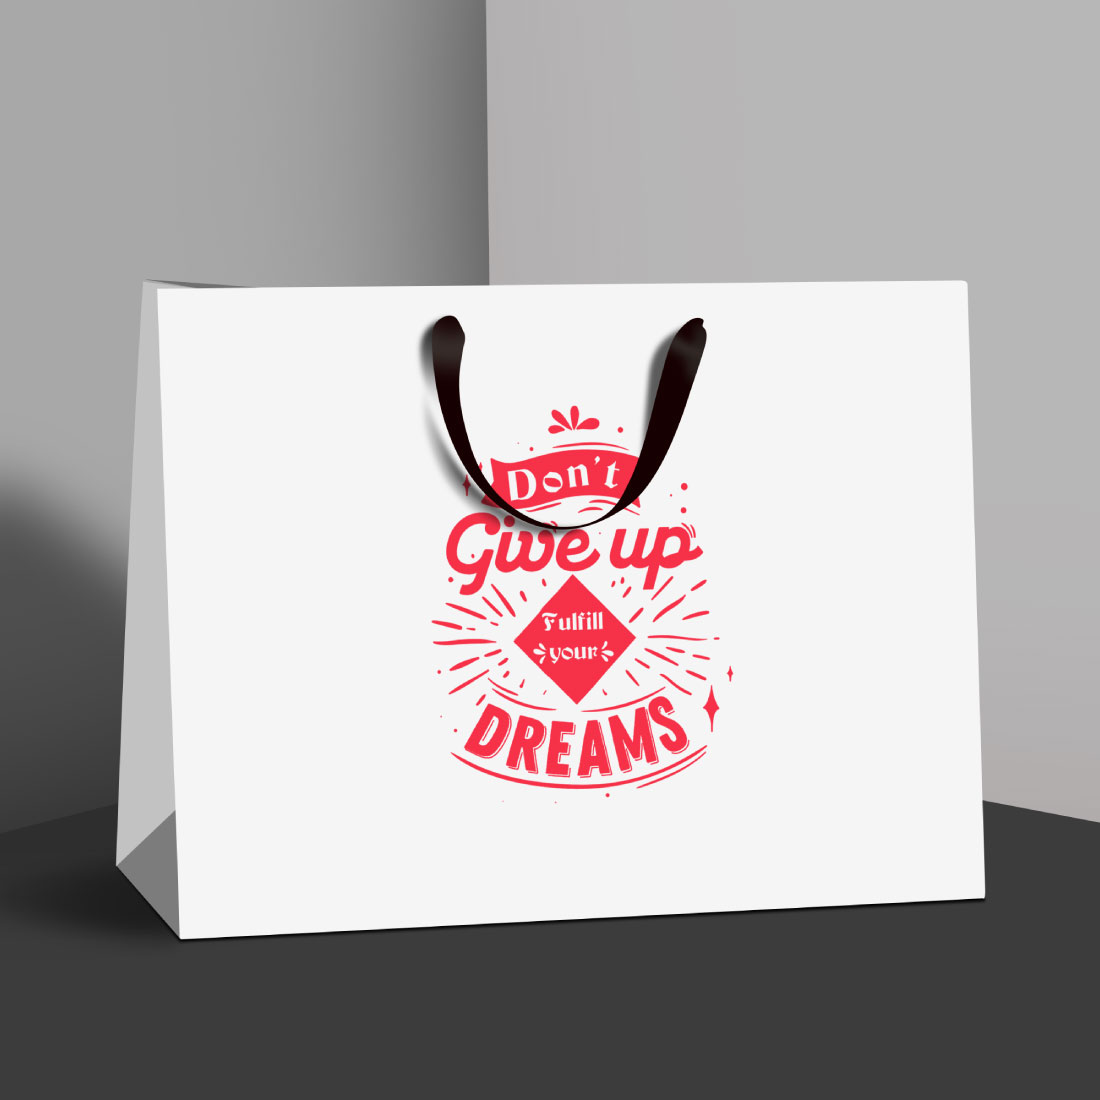 dont give up fulfill your dreams bag design 417